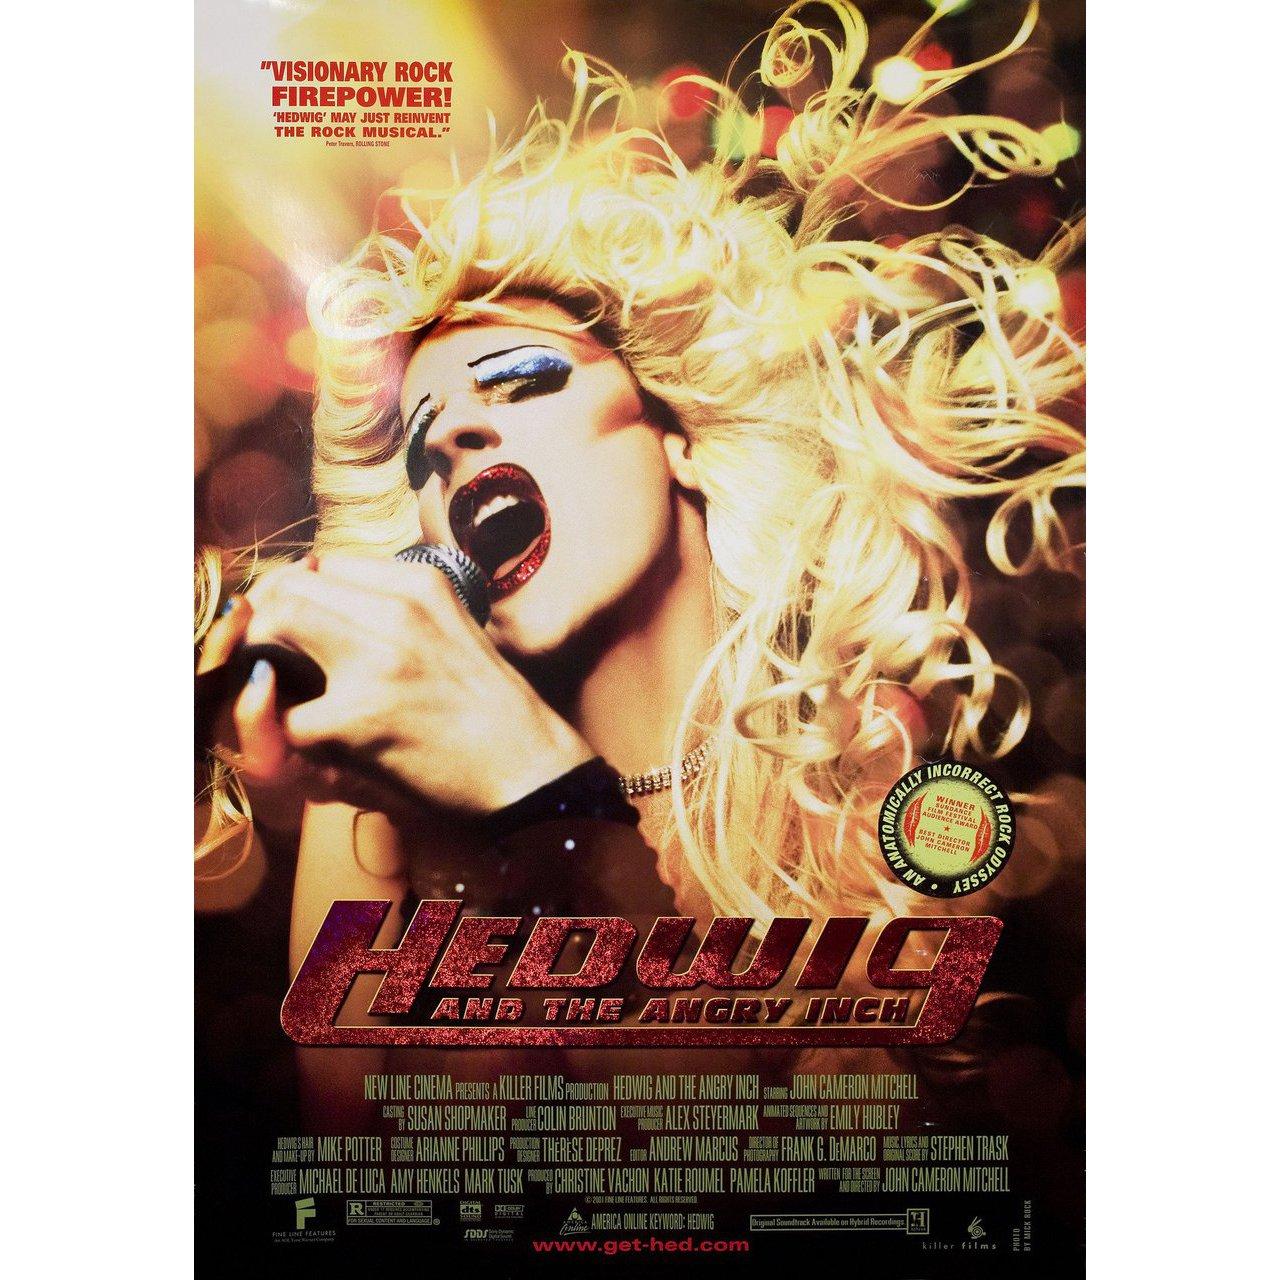 Original 2001 U.S. one sheet poster for the film Hedwig and the Angry Inch directed by John Cameron Mitchell with John Cameron Mitchell / Miriam Shor / Stephen Trask / Theodore Liscinski. Very good-fine condition, rolled. Please note: the size is